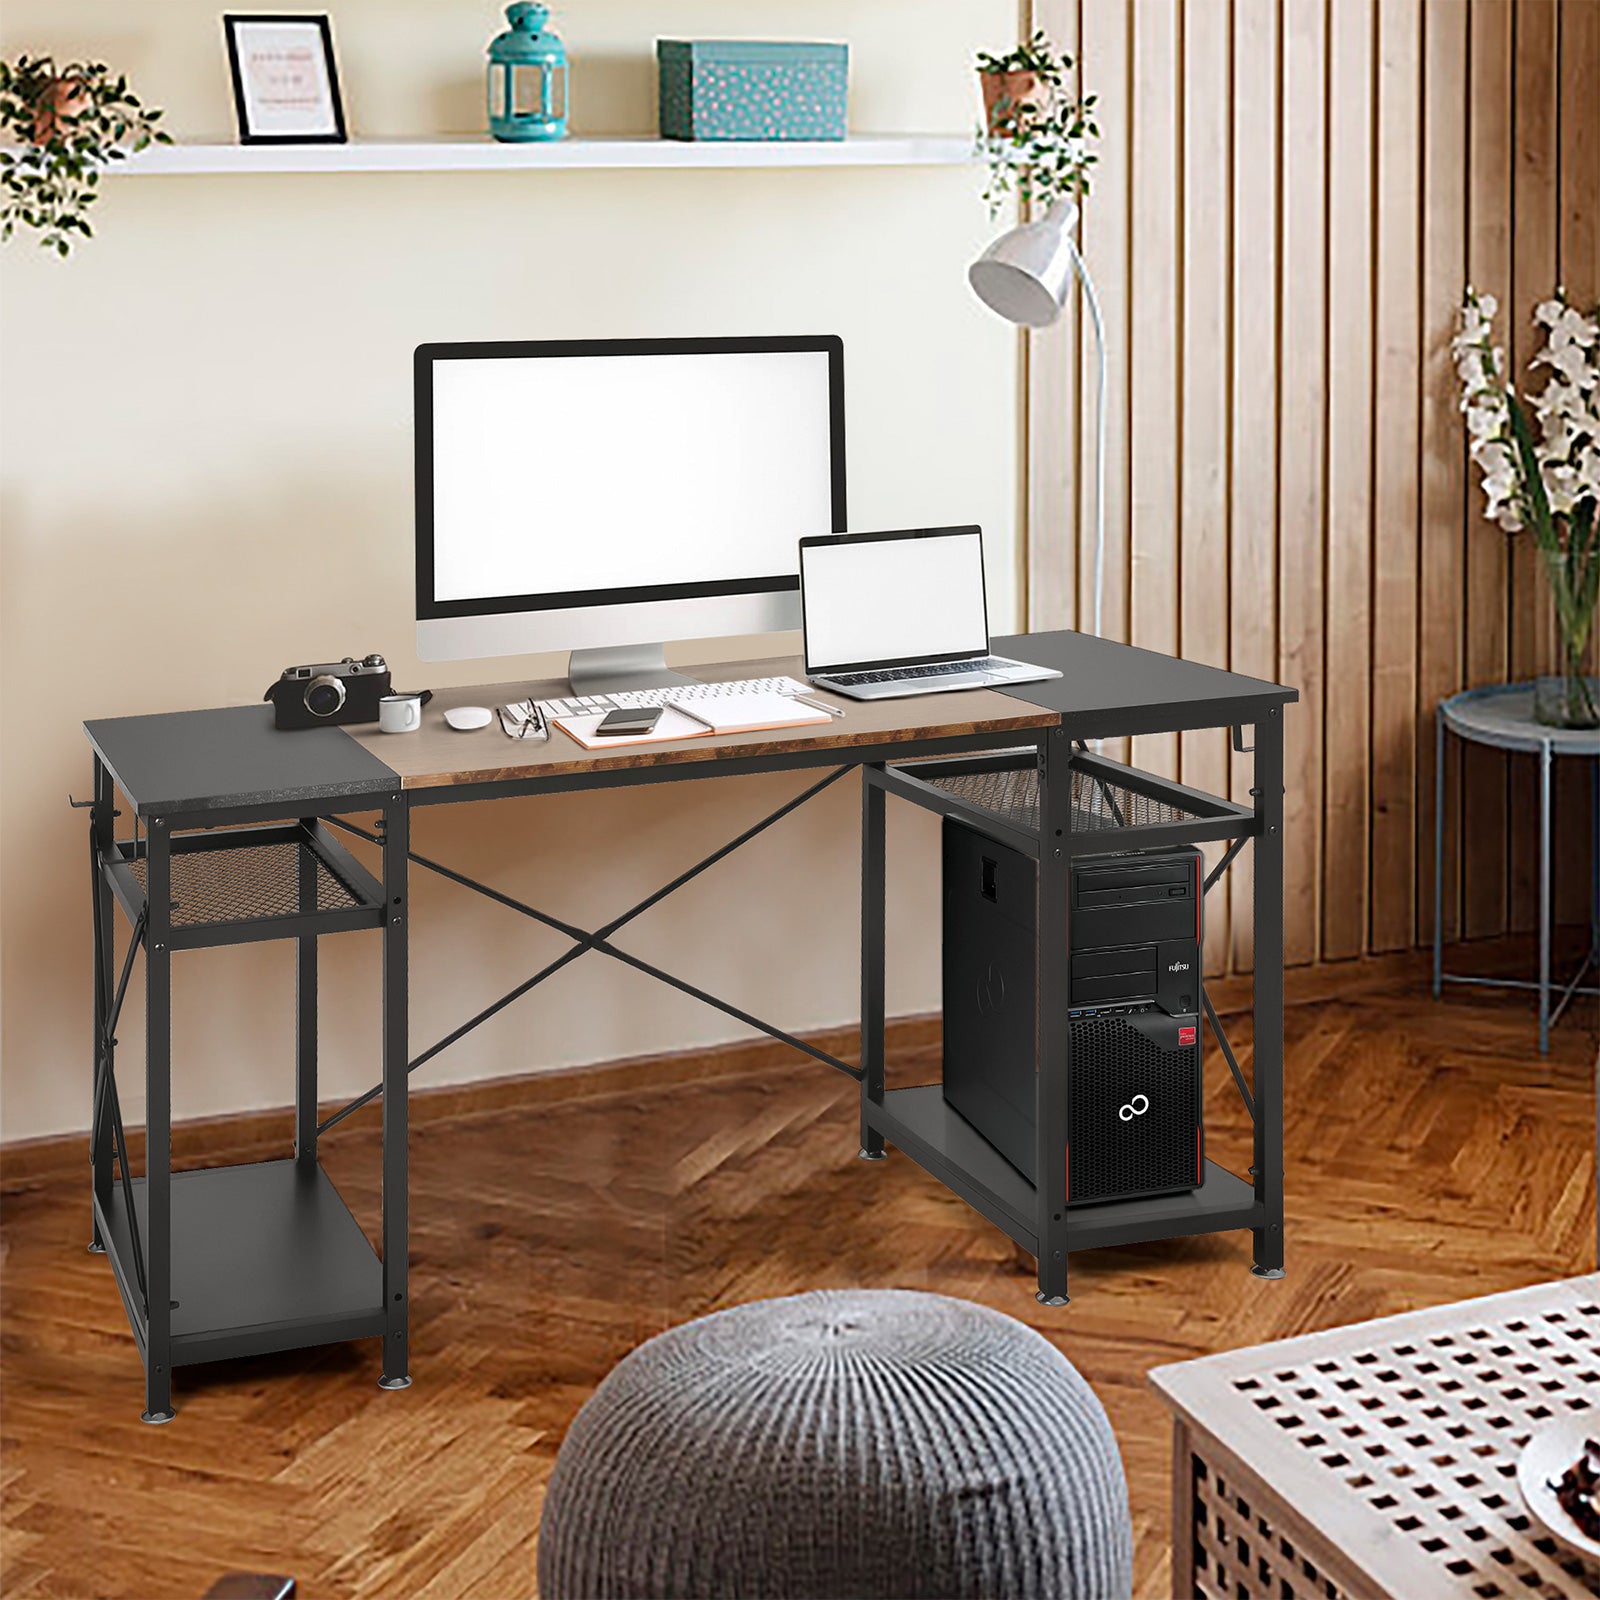 47.2" Home Office Computer Desk with Storage Shelves and 4 Hooks, Rustic and Black